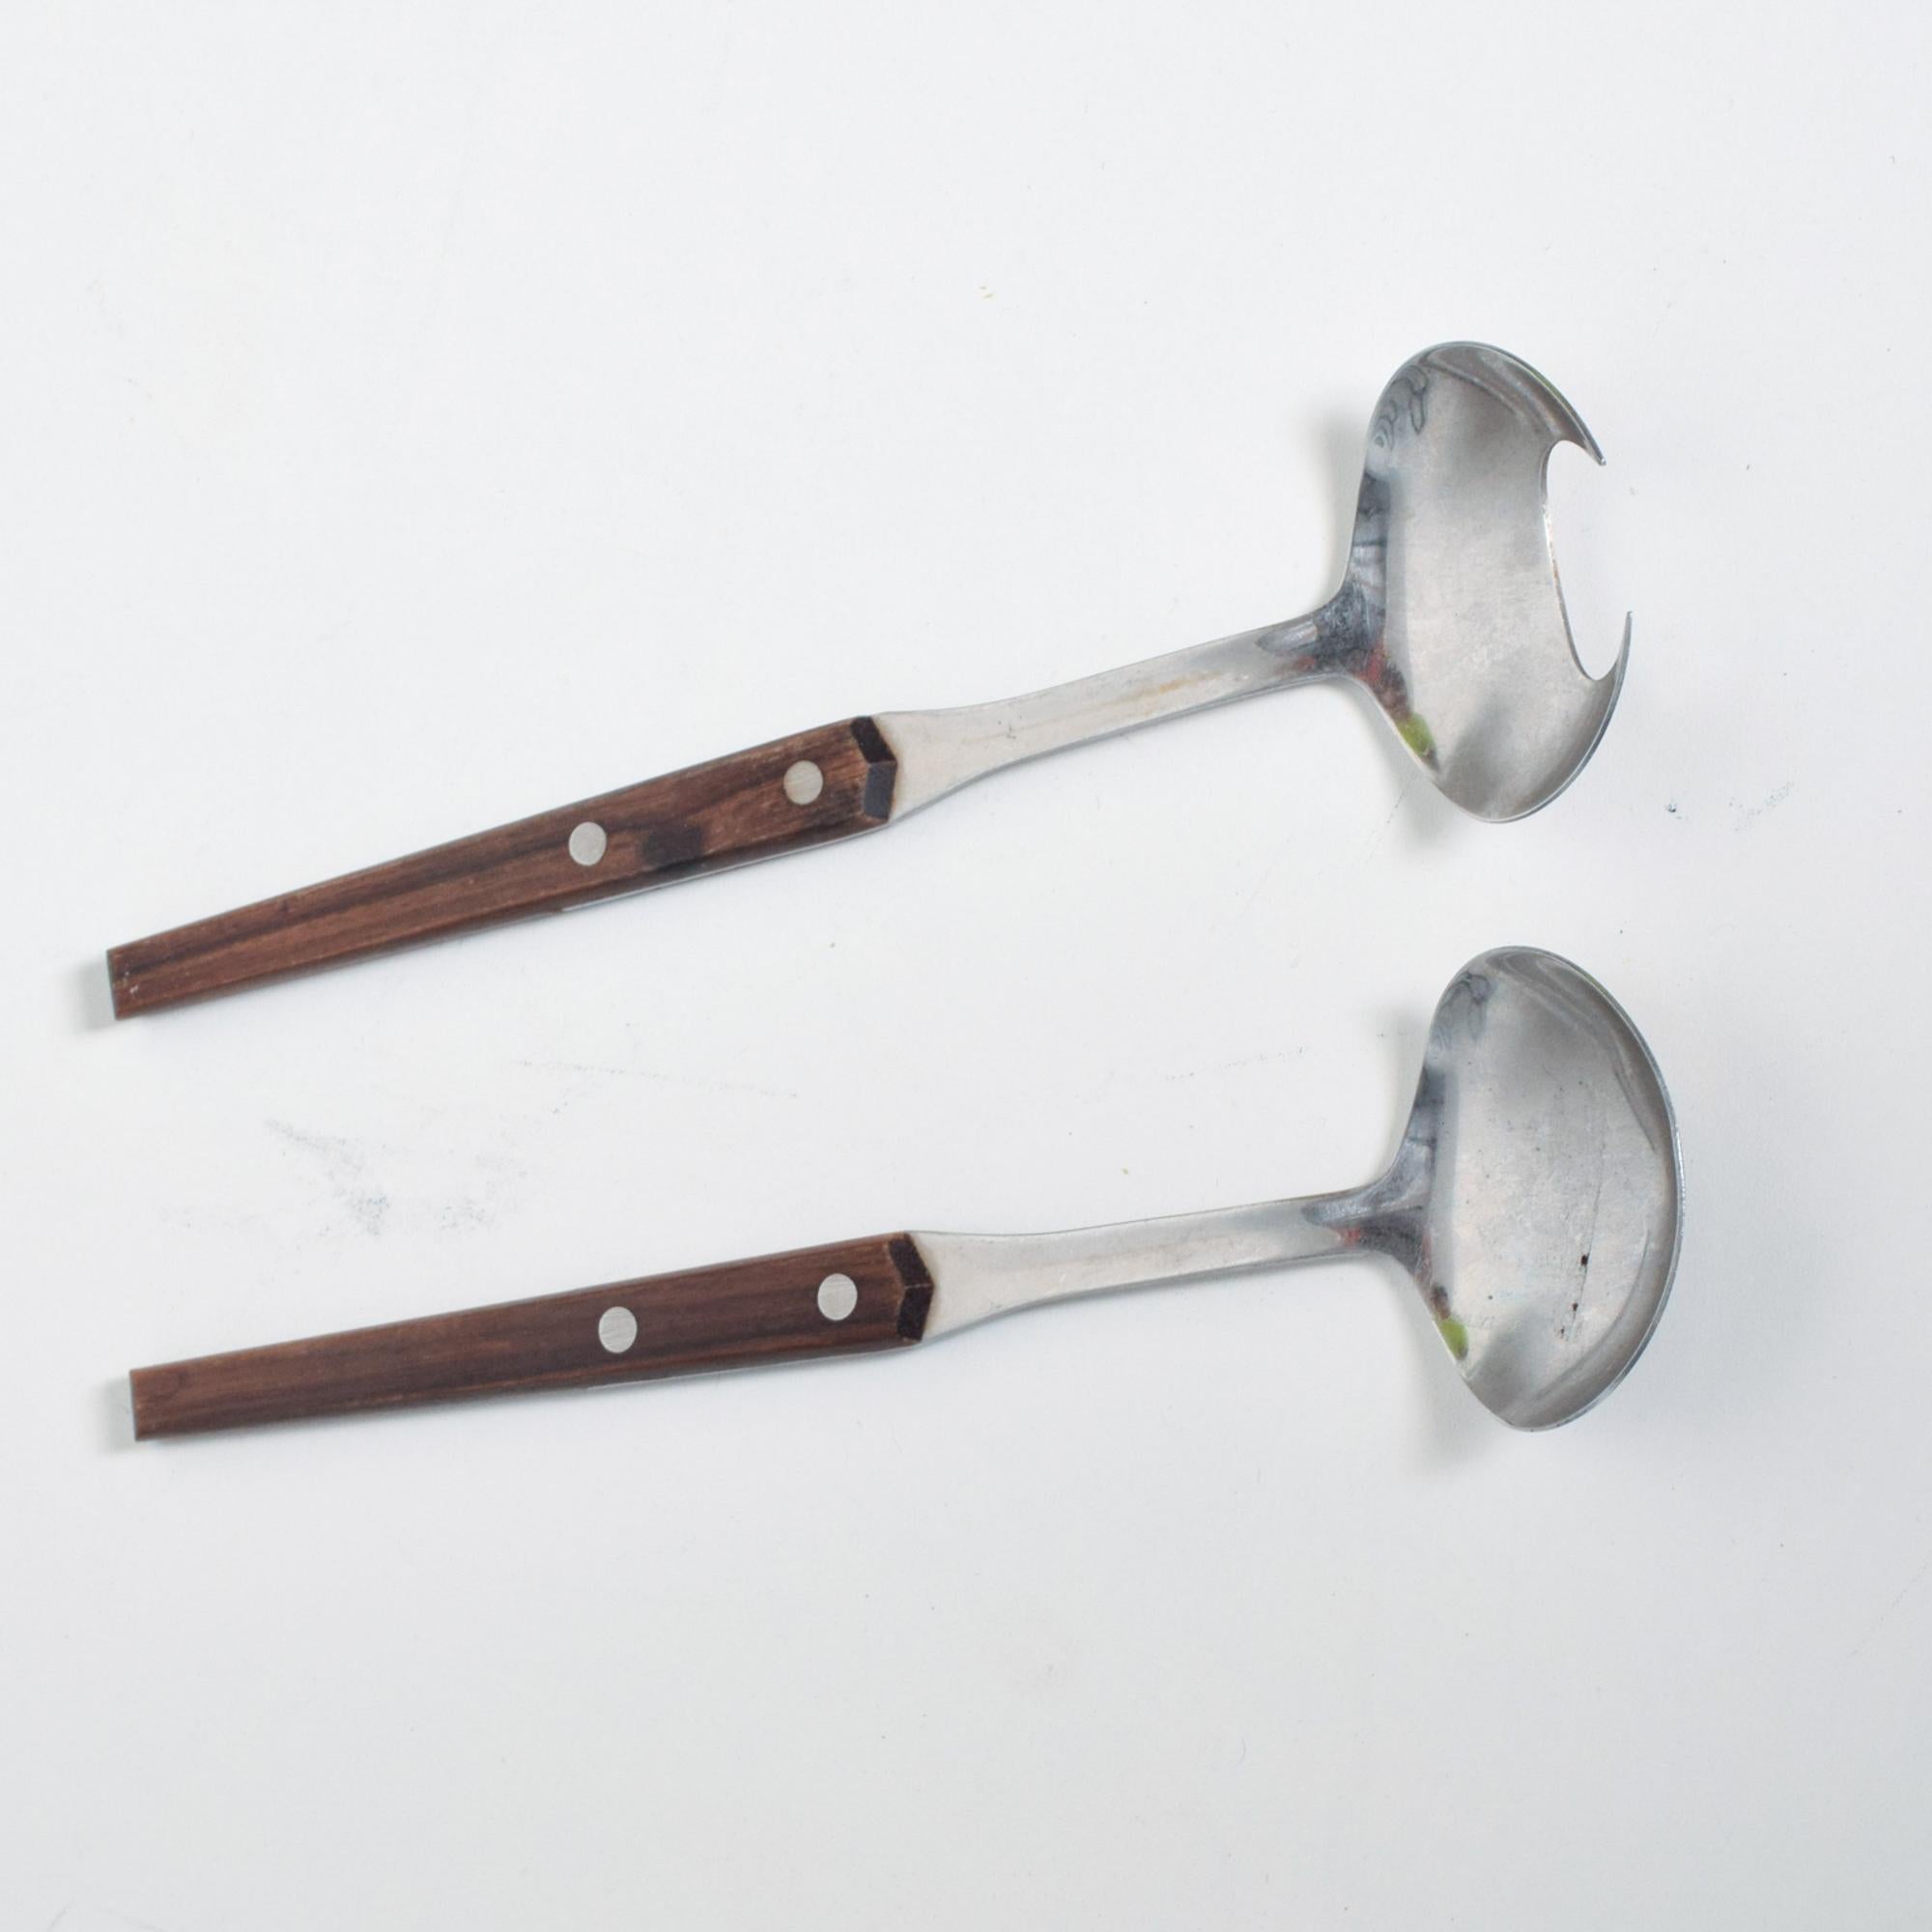 We are pleased to offer you: Midcentury set of salad servers in the style of Dansk designs Denmark. 
Made in stainless steel and rosewood. 
Measures 2.63